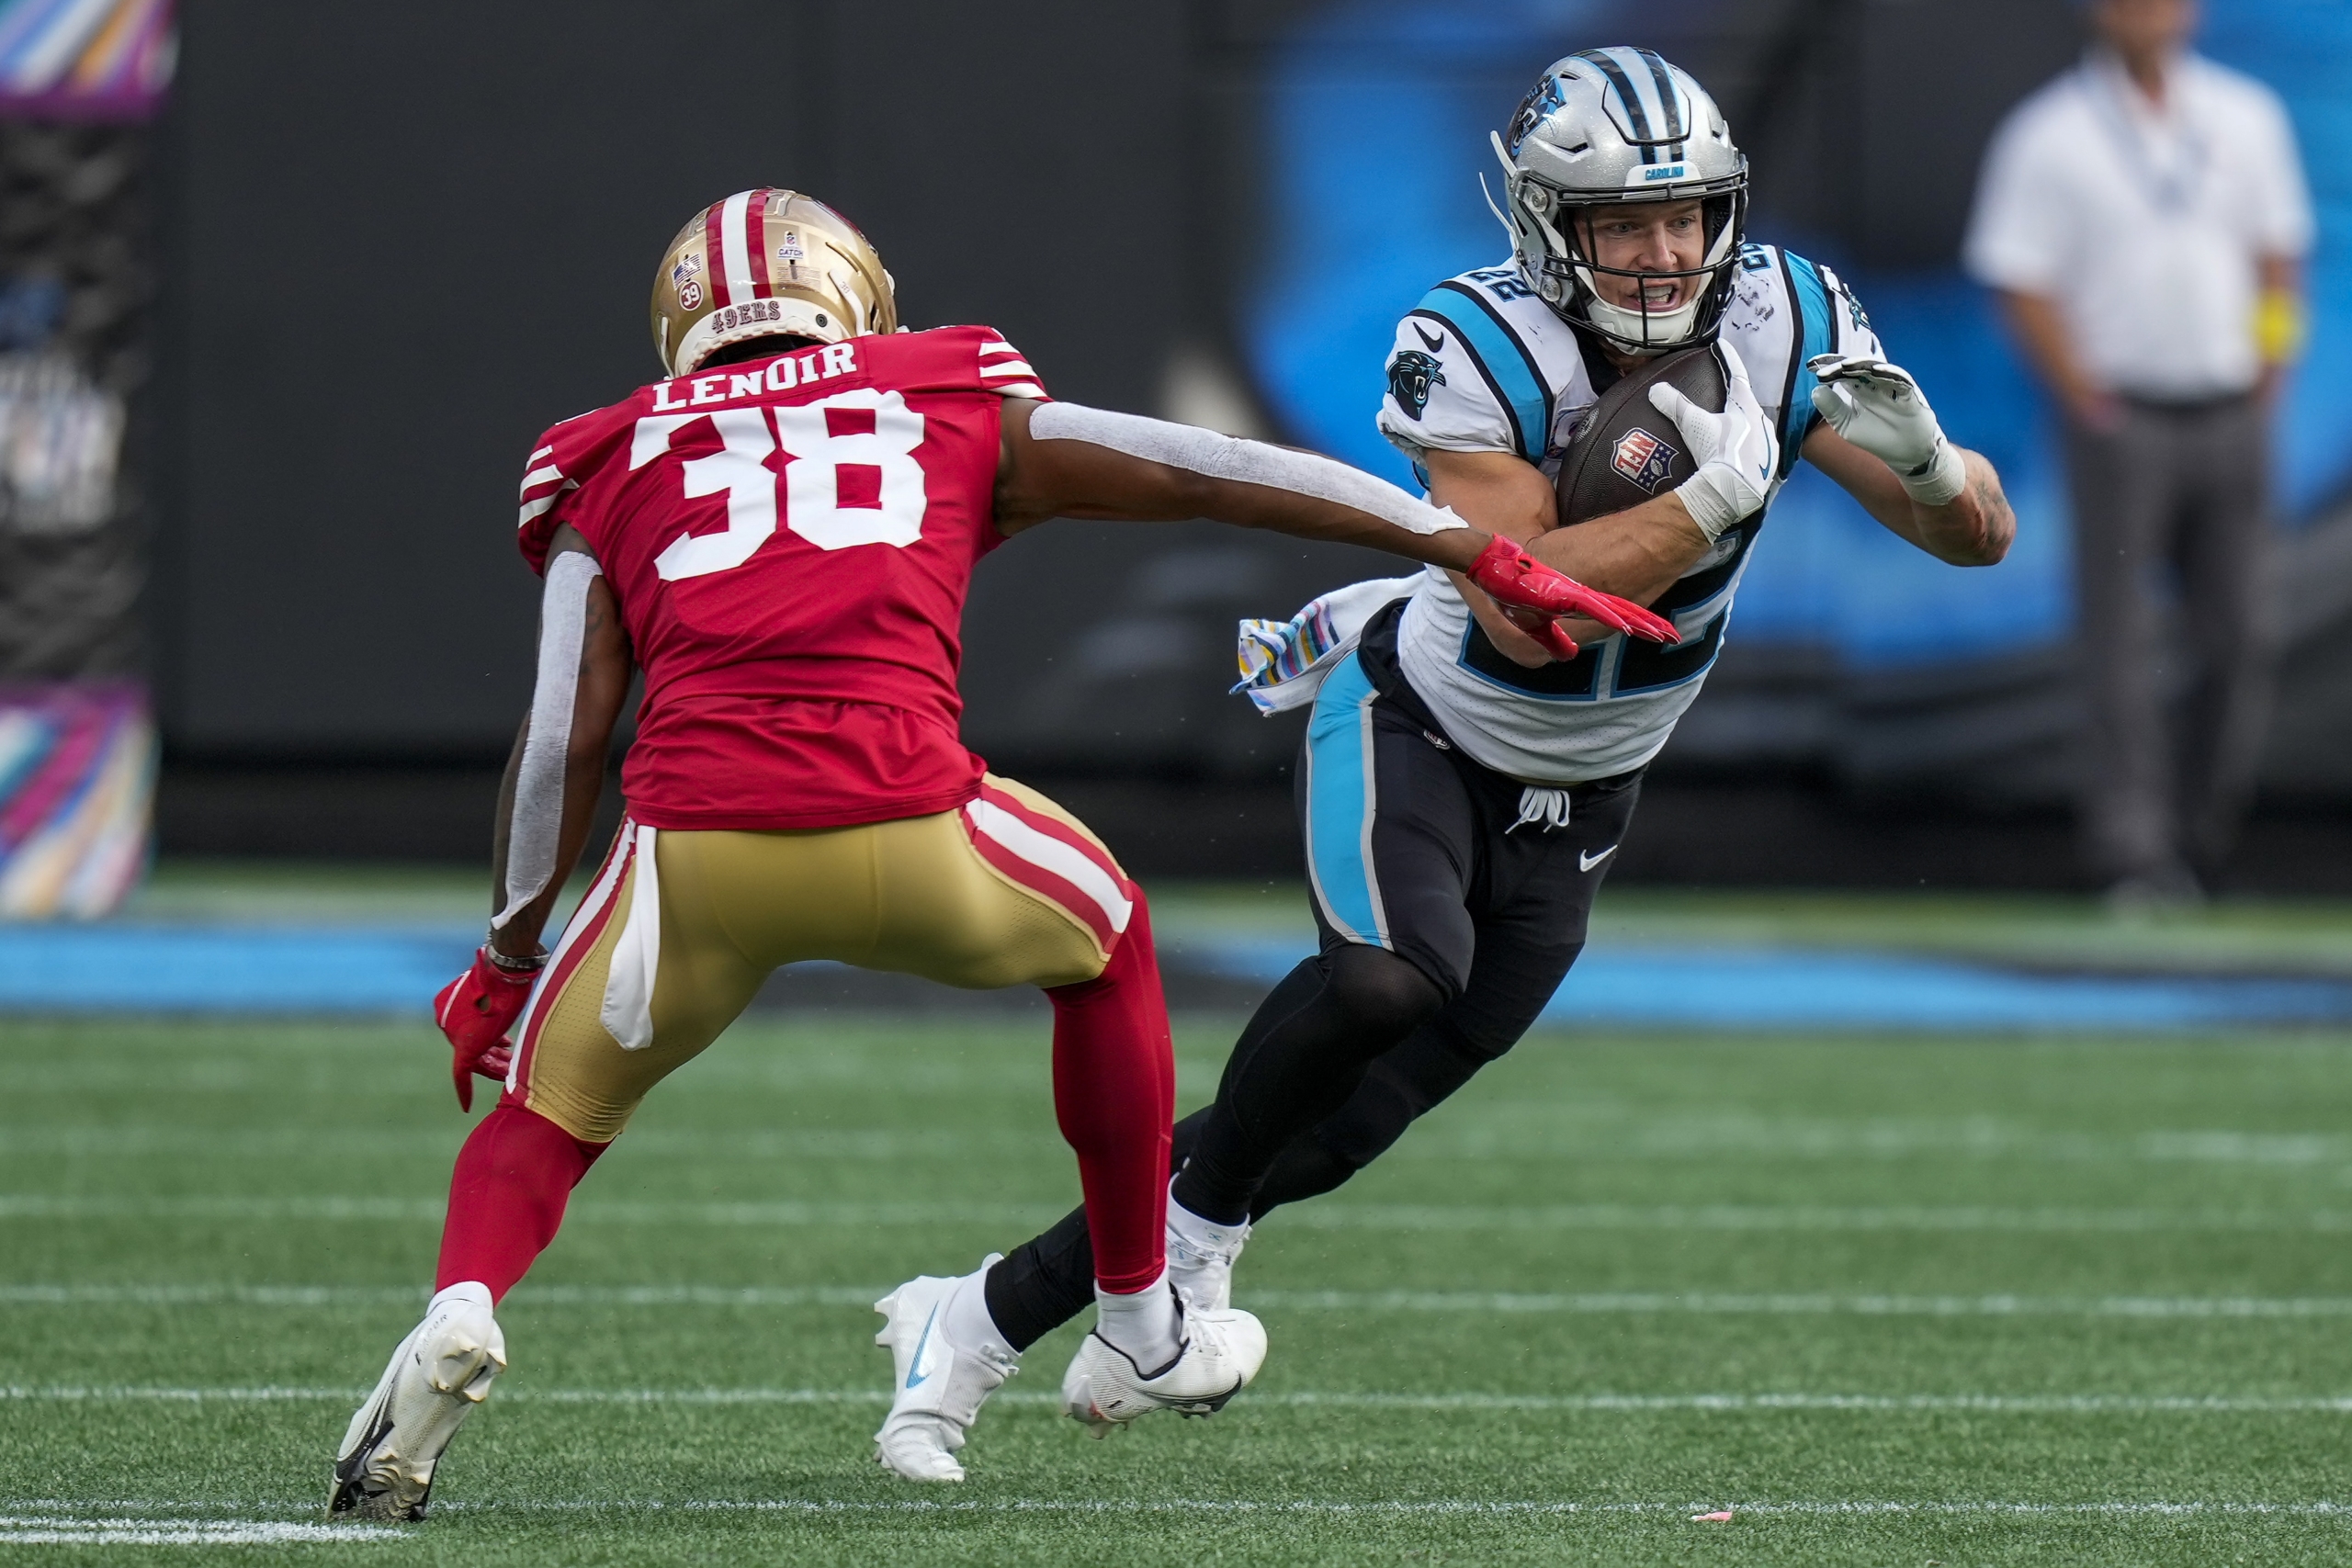 Analyzing potential trade scenarios with Chiefs and Panthers